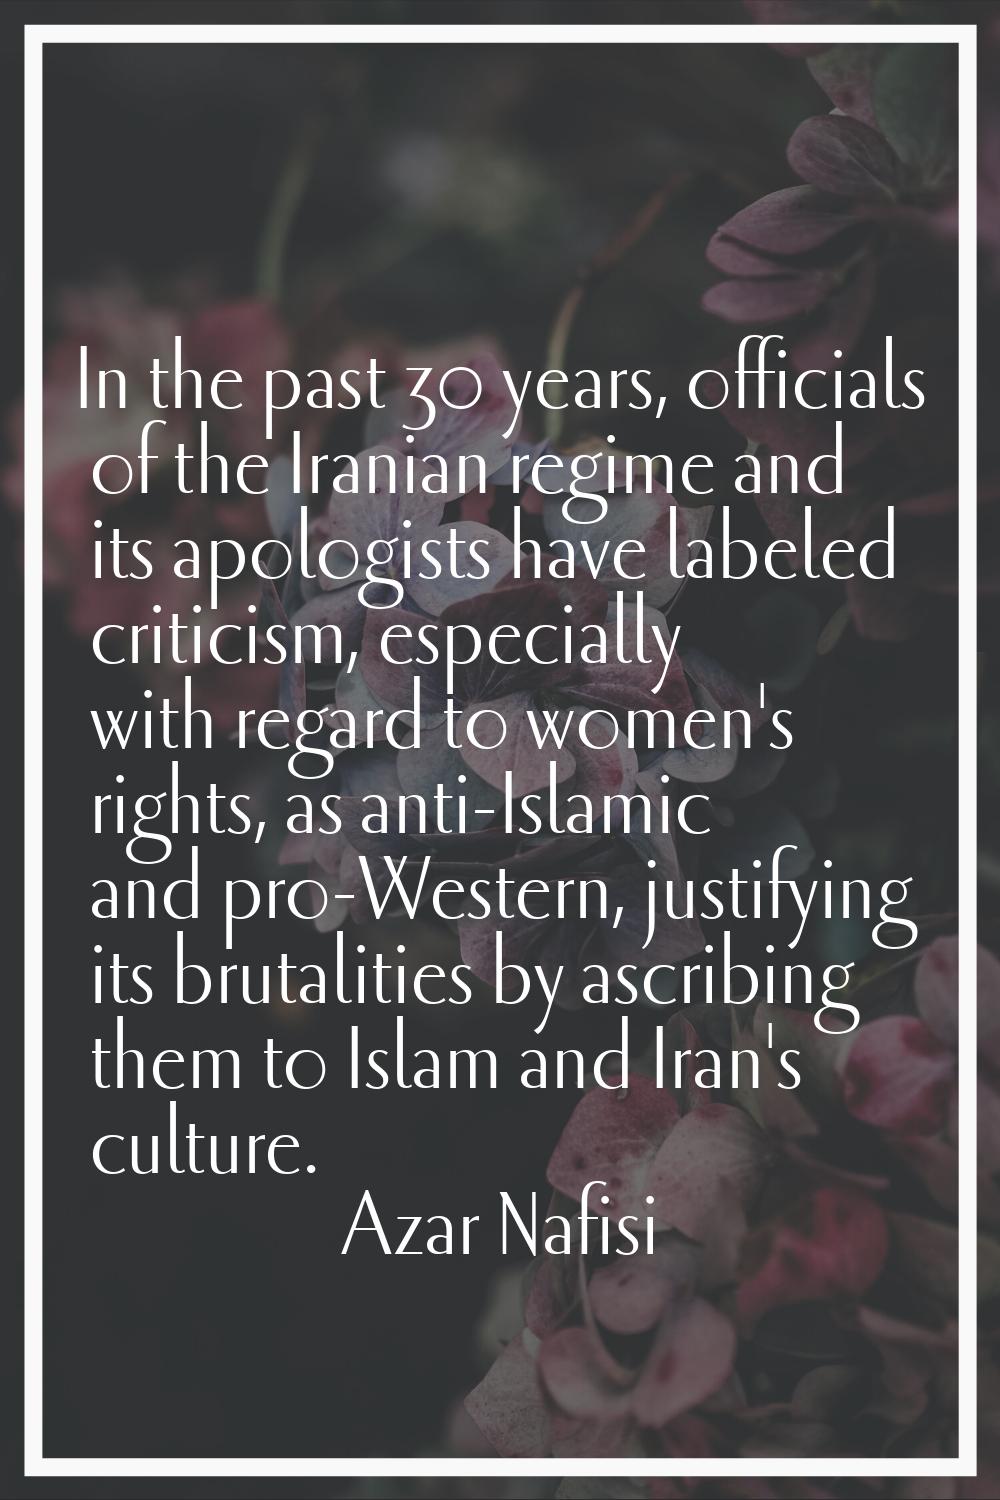 In the past 30 years, officials of the Iranian regime and its apologists have labeled criticism, es